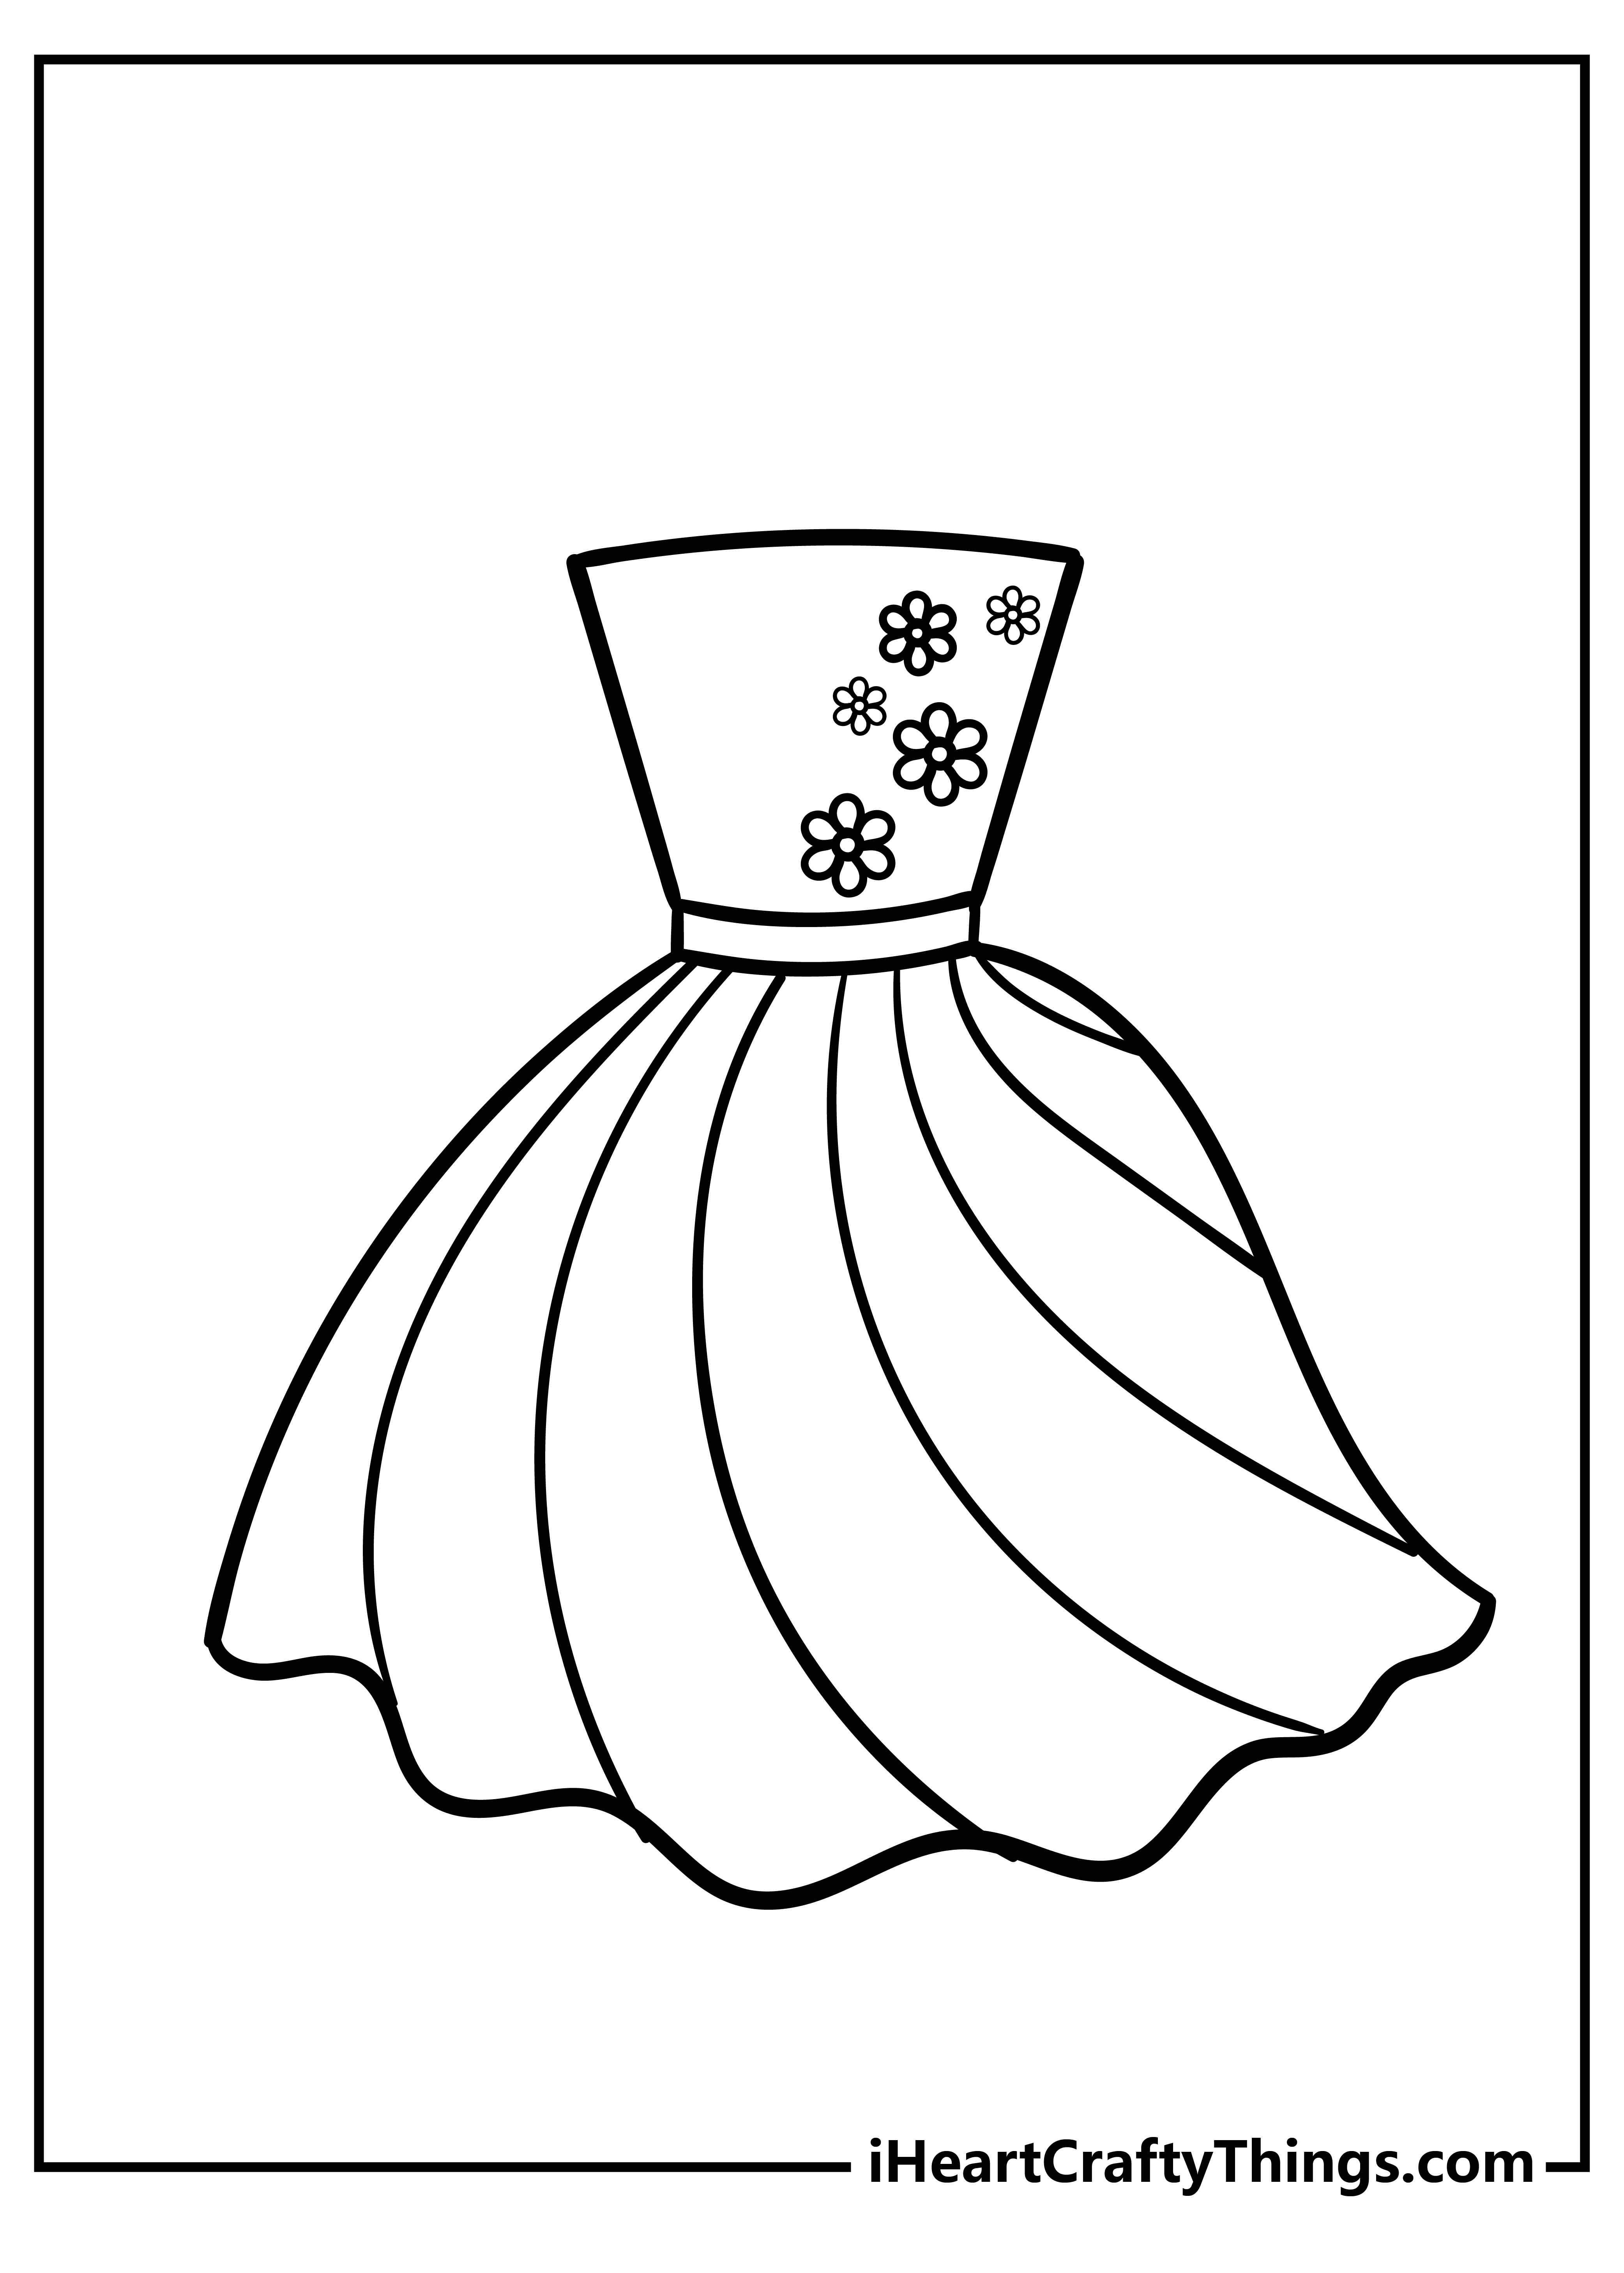 Dress Coloring Pages for adults free printable